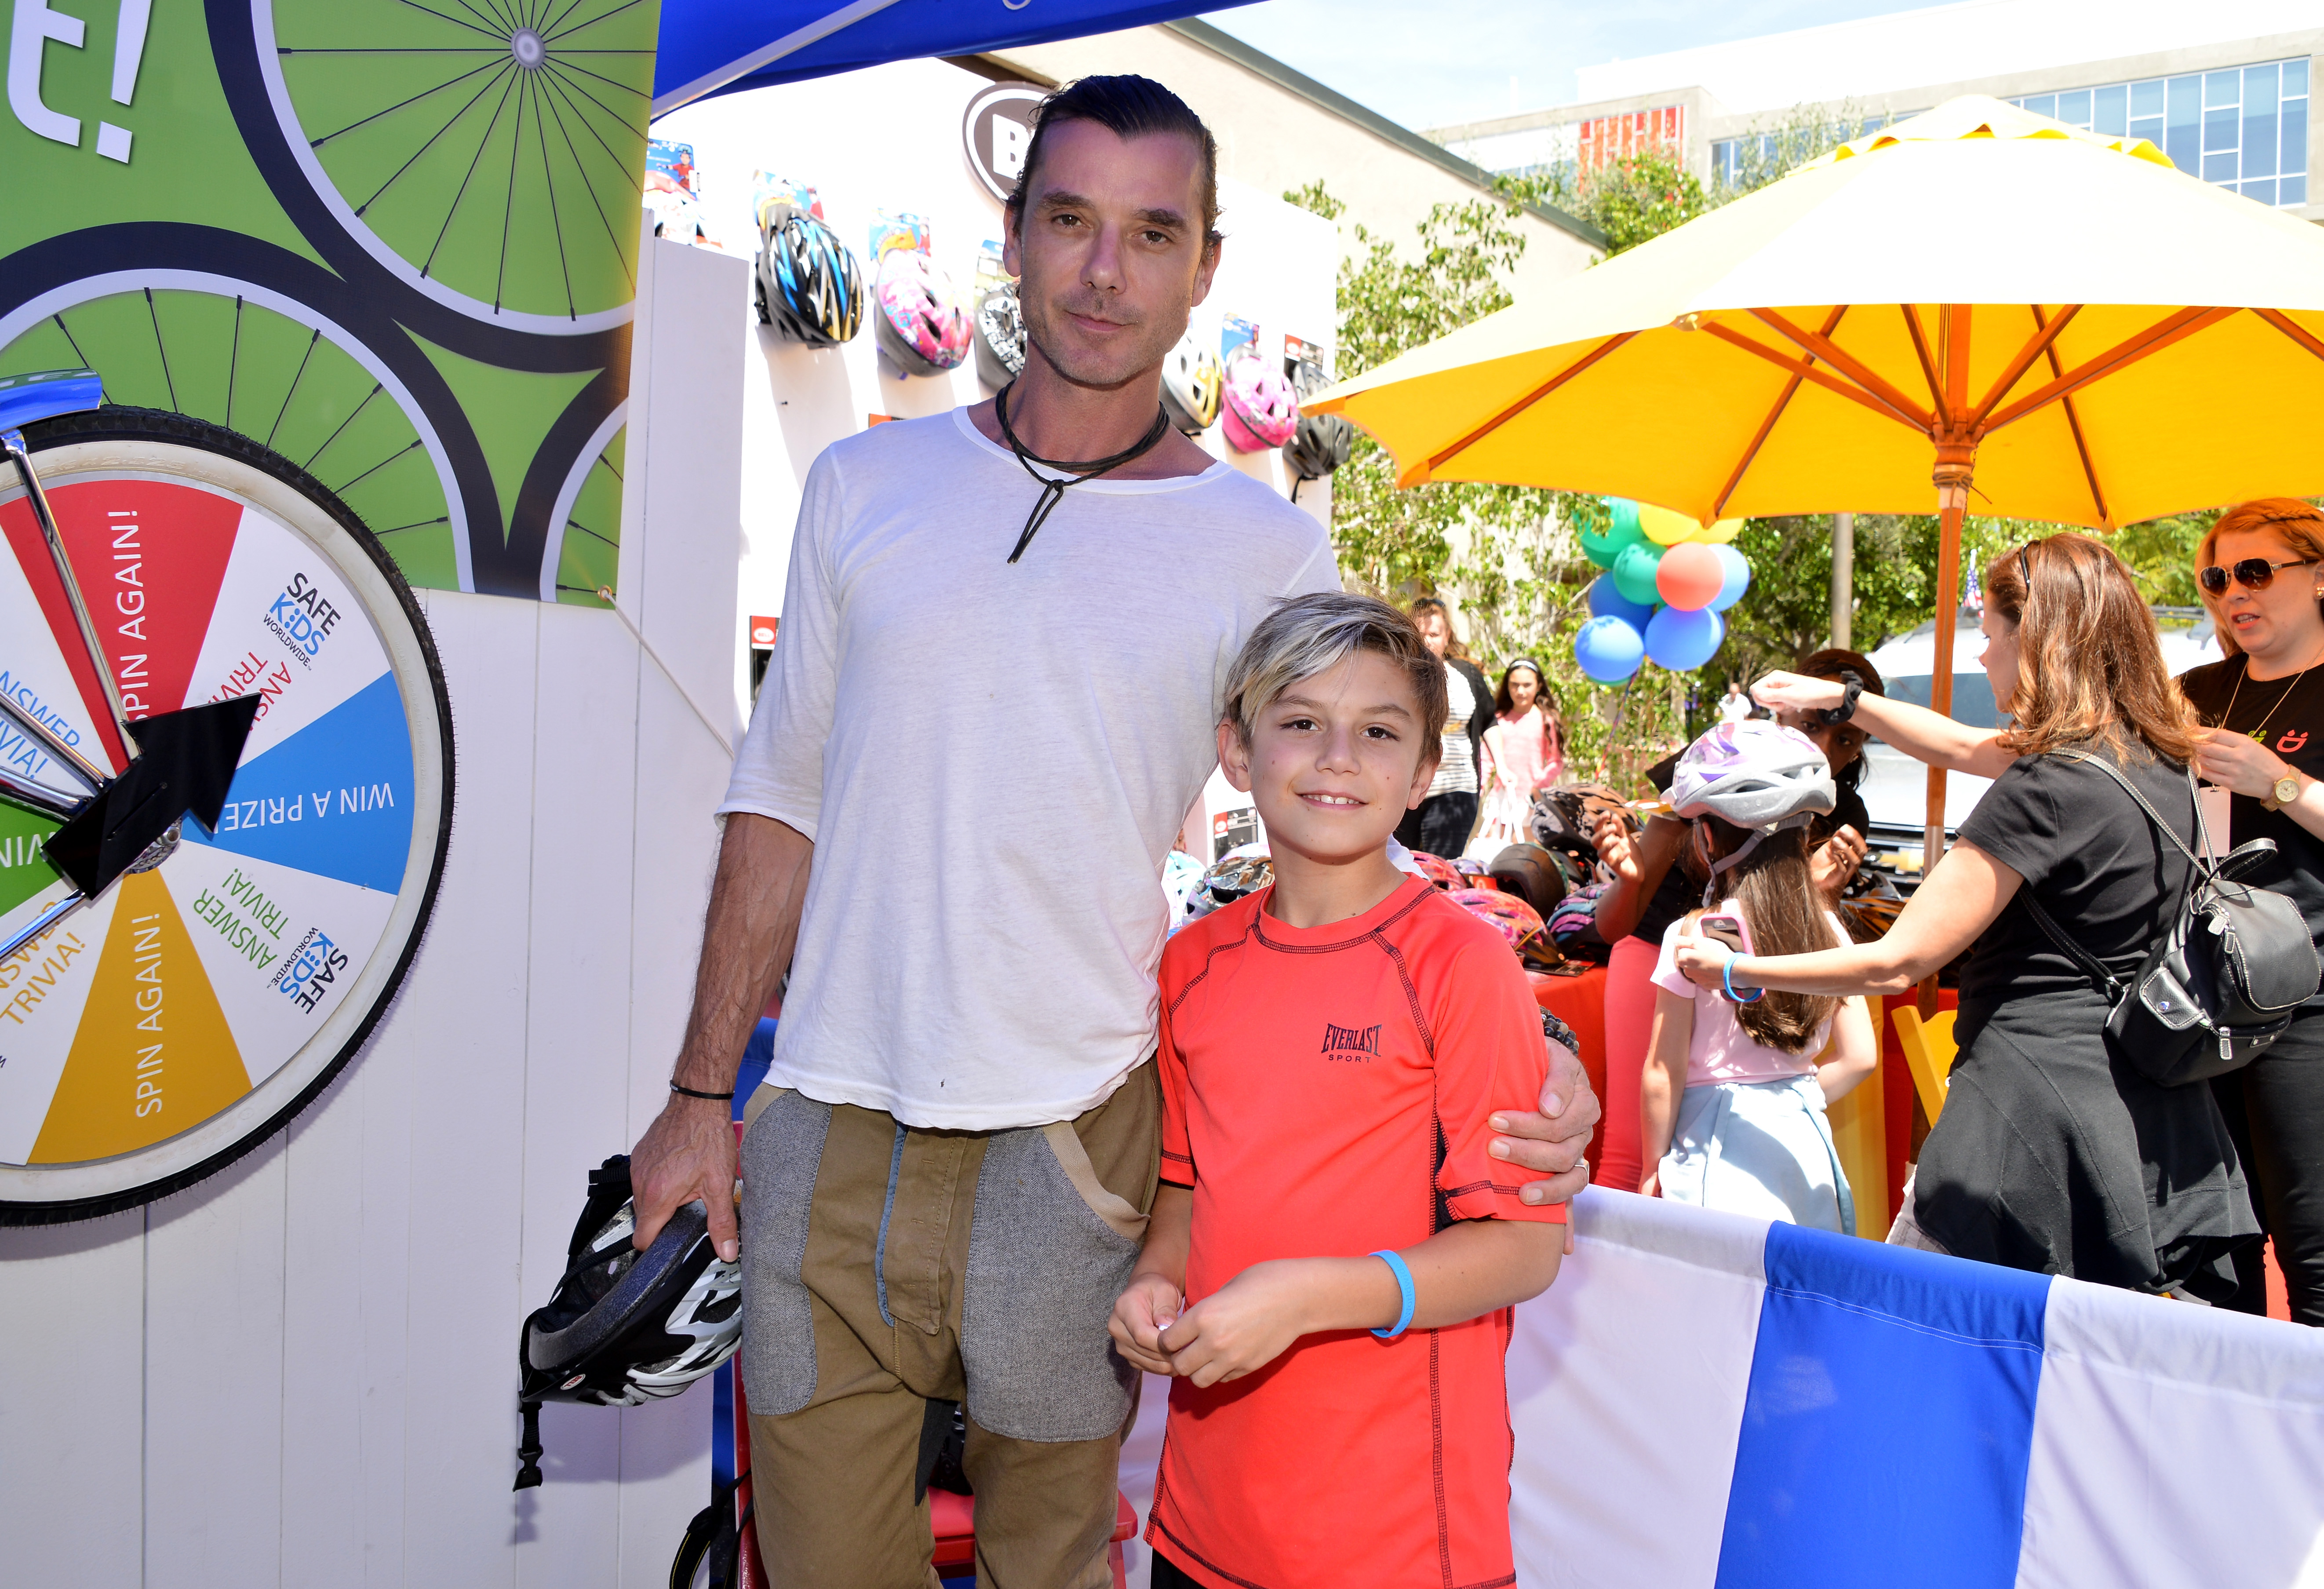 Gavin and Kingston Rossdale at the Safe Kids Day event in West Hollywood, California on April 26, 2015 | Source: Getty Images